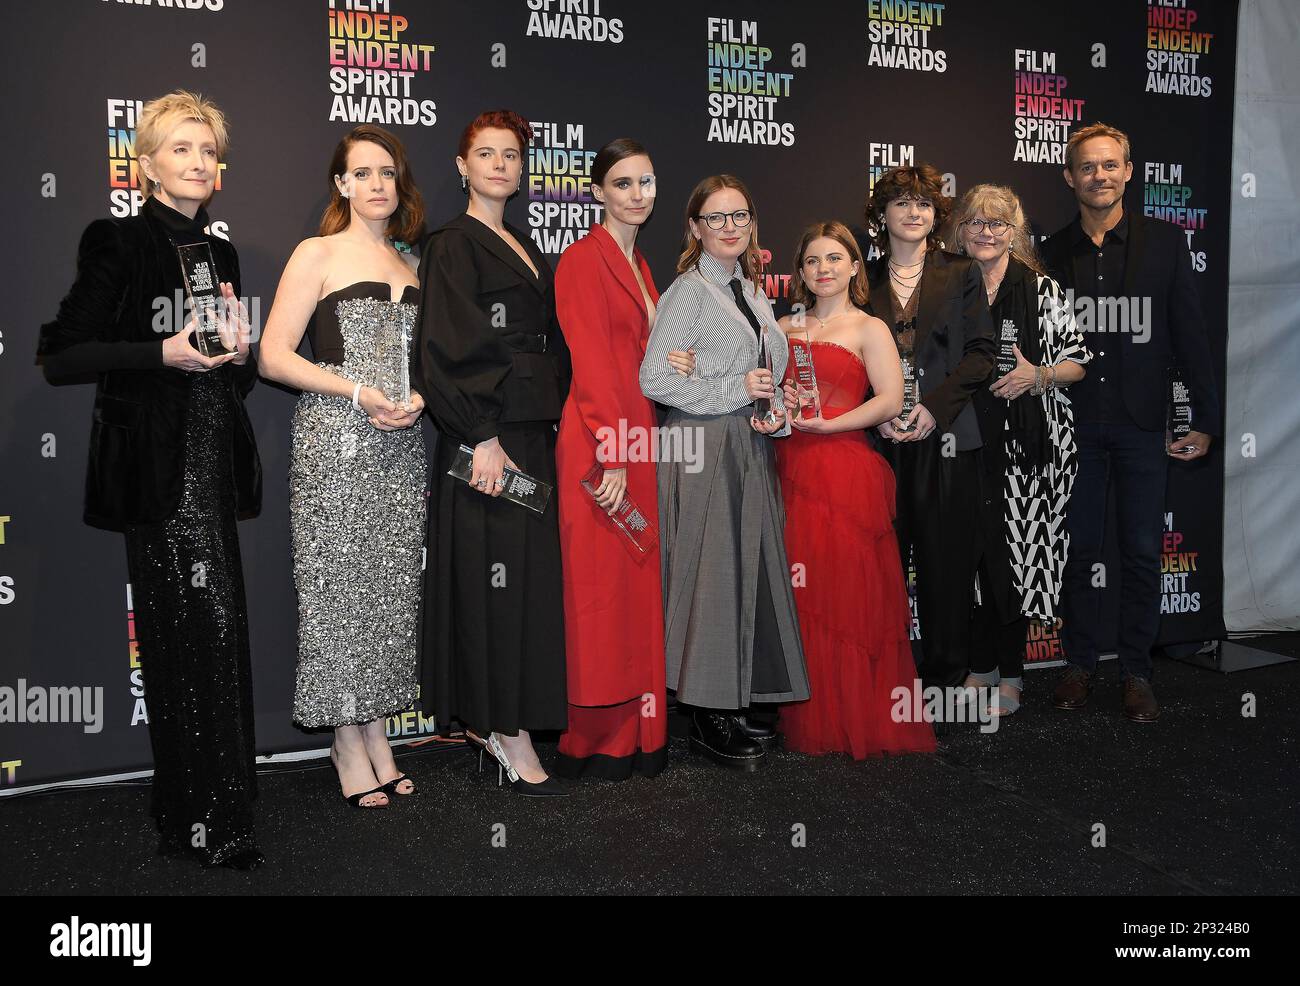 Los Angeles, USA. 04th Mar, 2023. Sheila McCarthy, Claire Foy, Jessie Buckley, Rooney Mara, Sarah Polley, Kate Hallett, Liv McNeil, Judith Ivey and John Buchan, winners of the Robert Altman Award for “Women Talking” pose in the press room during the 2023 Film Independent Spirit Awards on March 04, 2023 in Santa Monica, CA, USA (Photo by Sthanlee B. Mirador/Sipa USA) Credit: Sipa USA/Alamy Live News Stock Photo